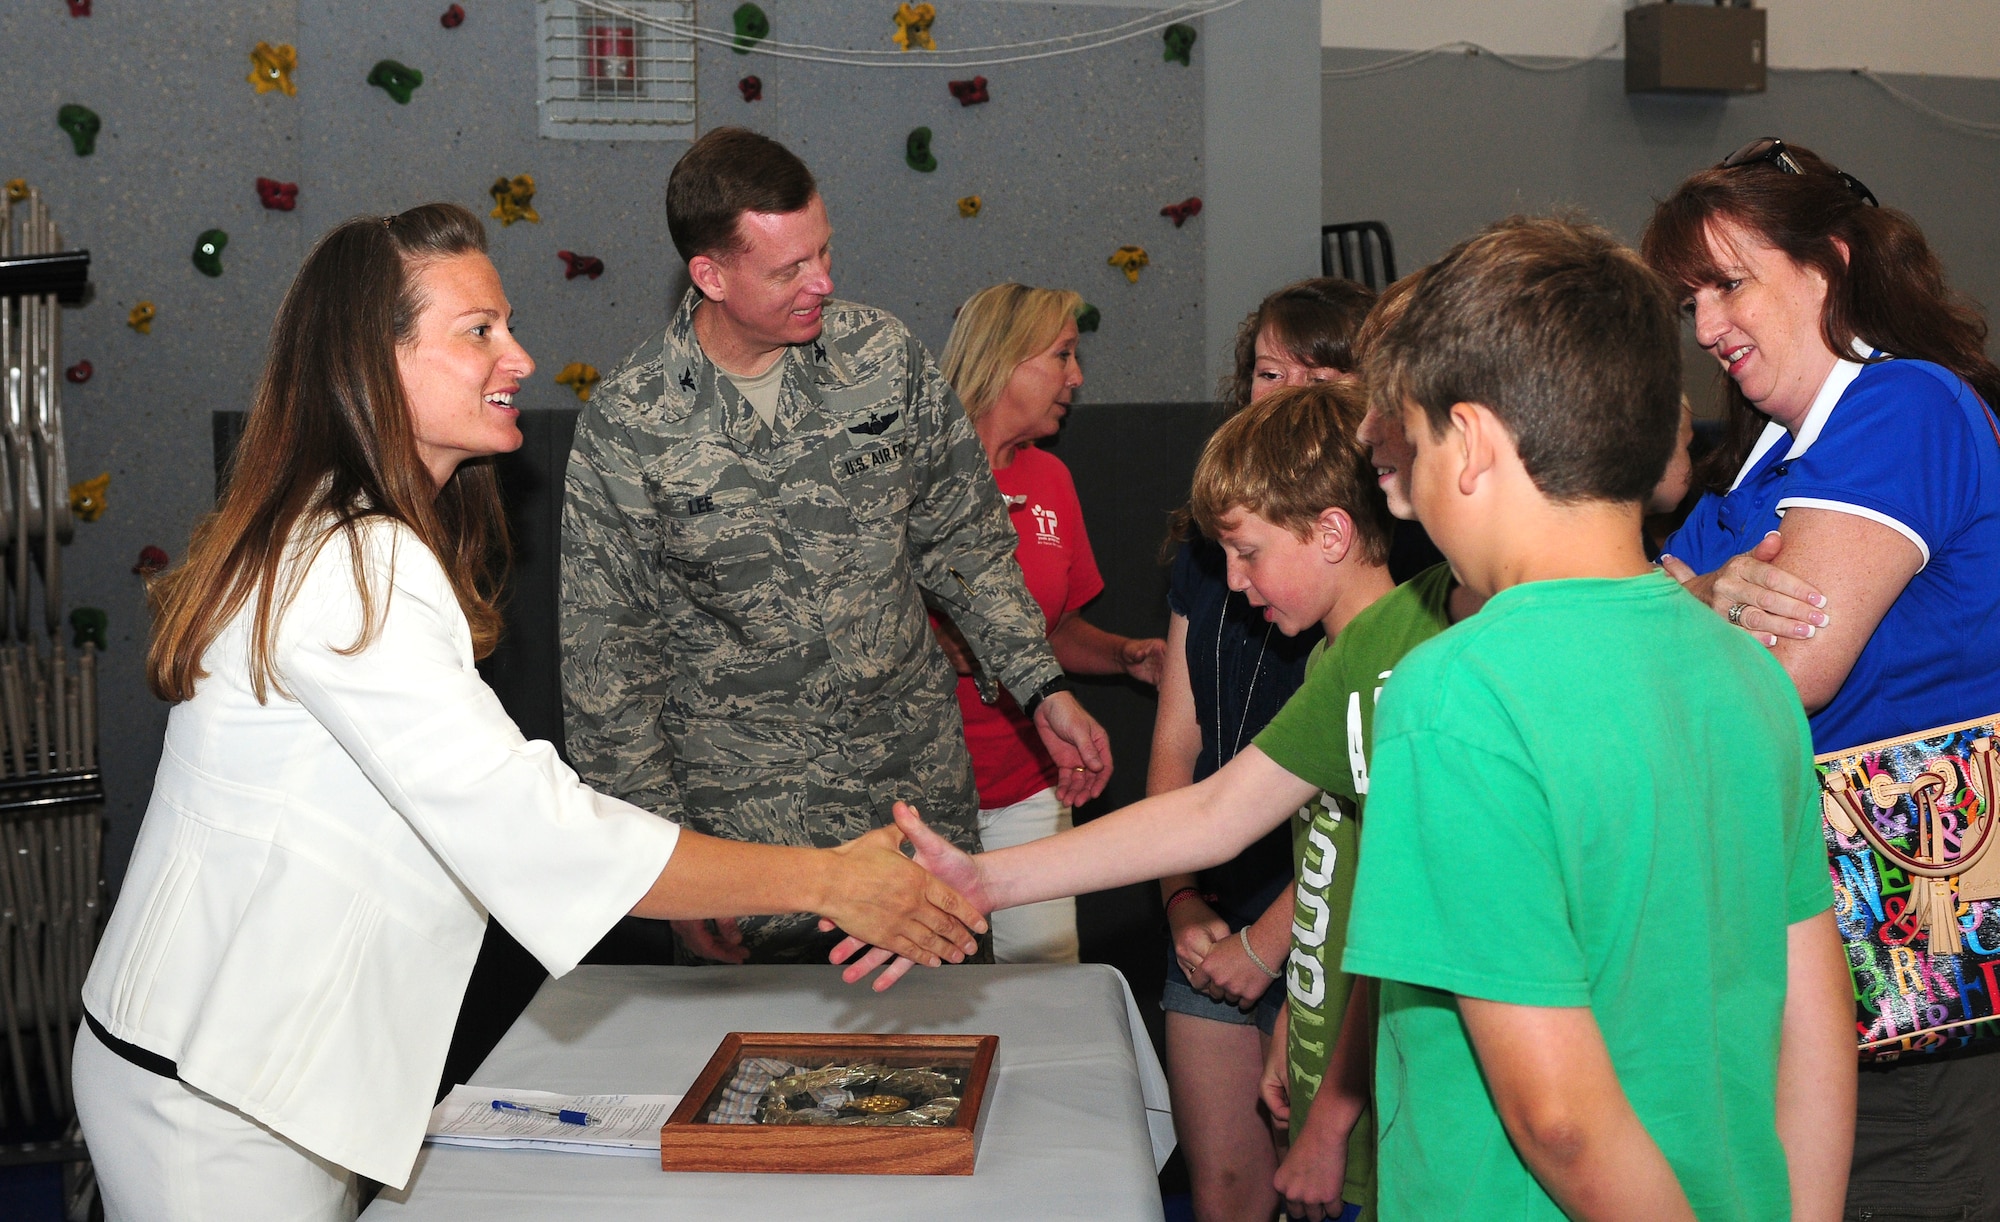 Jennifer Kelchner, a Paralympics gold medalist speaks to Col. Douglas Lee, 9th Reconnaissance Wing vice commander, and his family at the Youth Center at Beale Air Force Base, Calif., June 27, 2012. Kelchner kicked off Beale's Olympic Day with her story of winning a gold medal at the 1998 Winter Olympics in Japan. (U.S. Air Force photo by Senior Airman Allen Pollard)